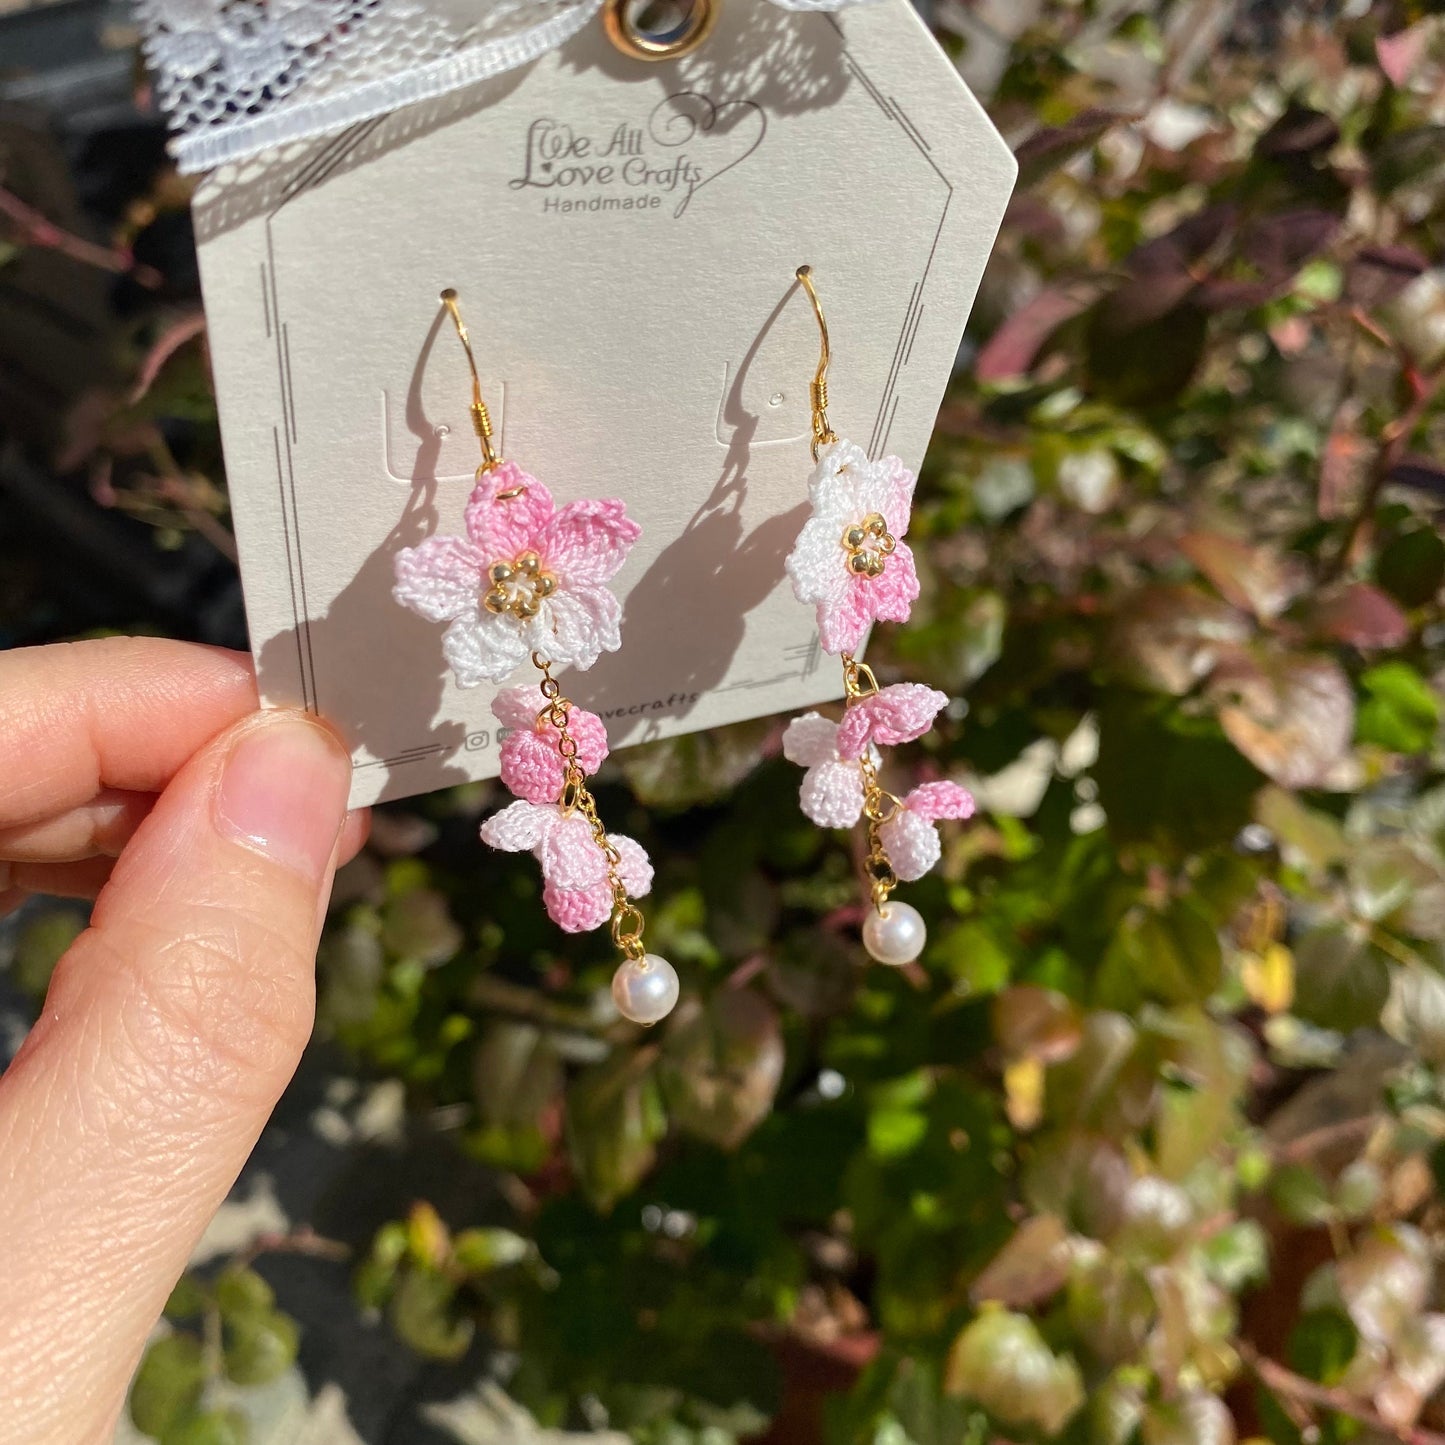 Load image into Gallery viewer, Light Pink ombre Cherry blossom flower cluster crochet dangle earrings/Micro crochet/14k gold/gift for her/Knitting handmade jewelry
